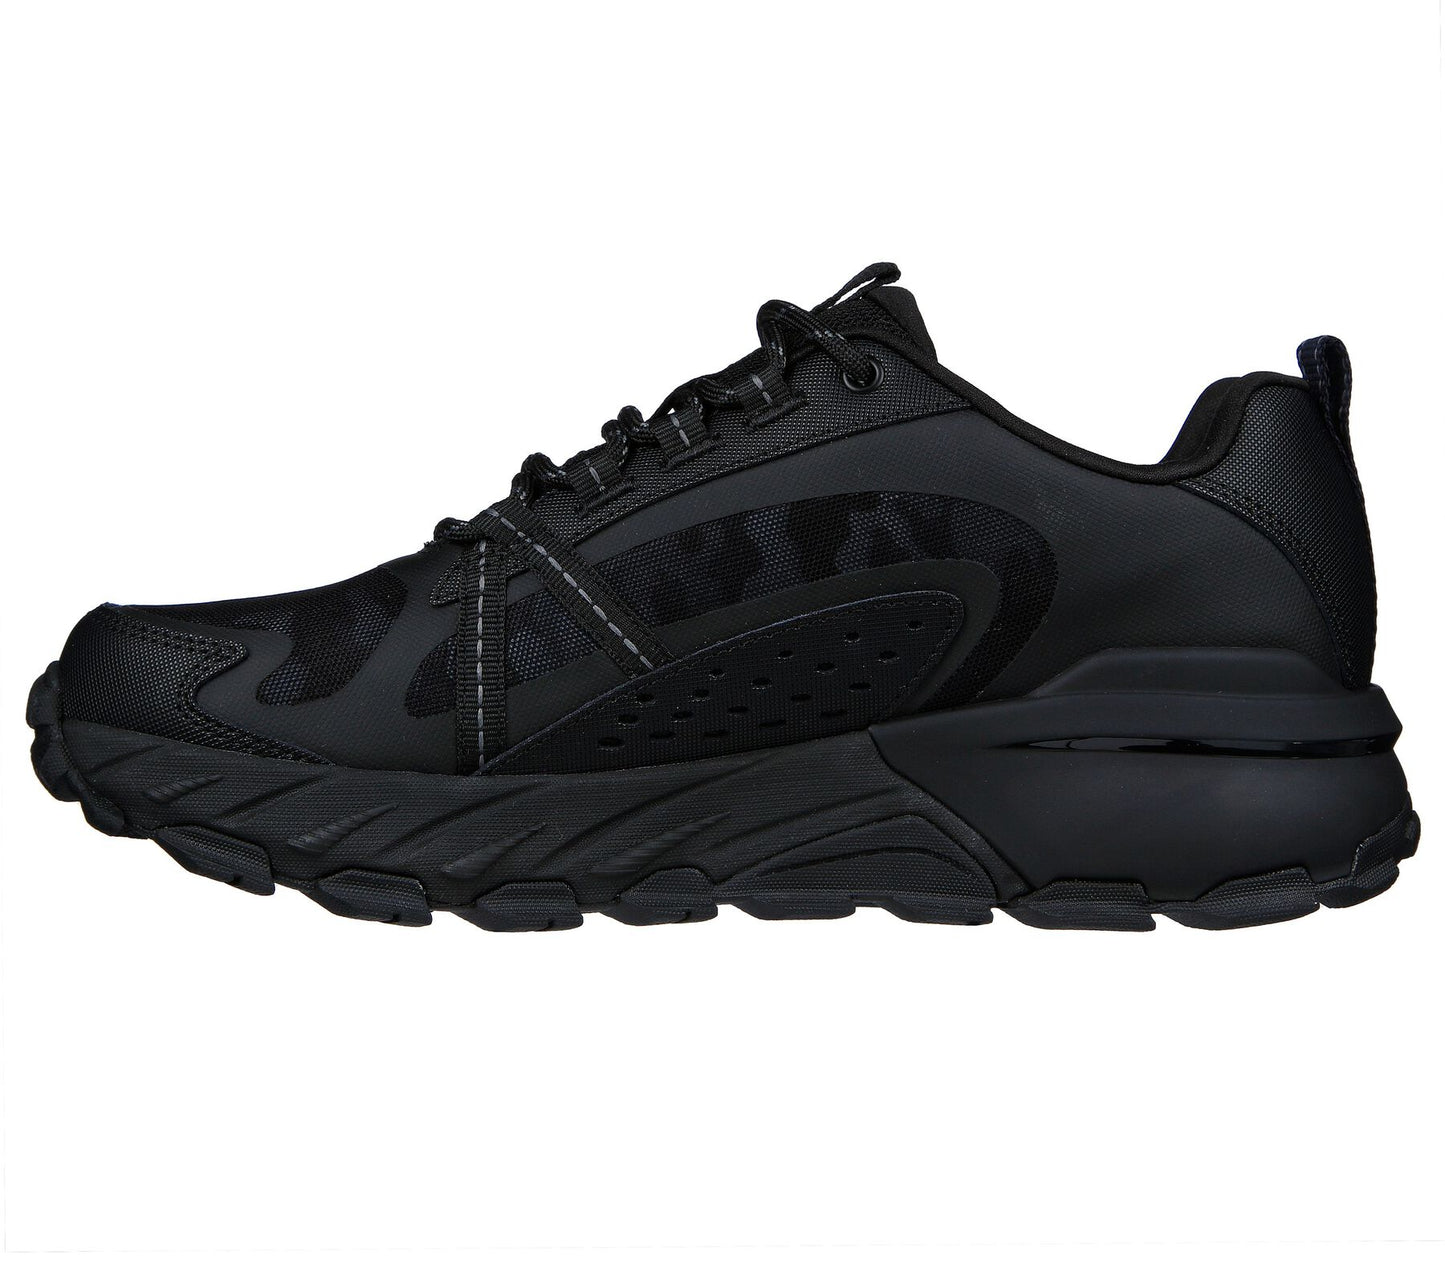 Skechers Max Protect - Task Force - Hombre